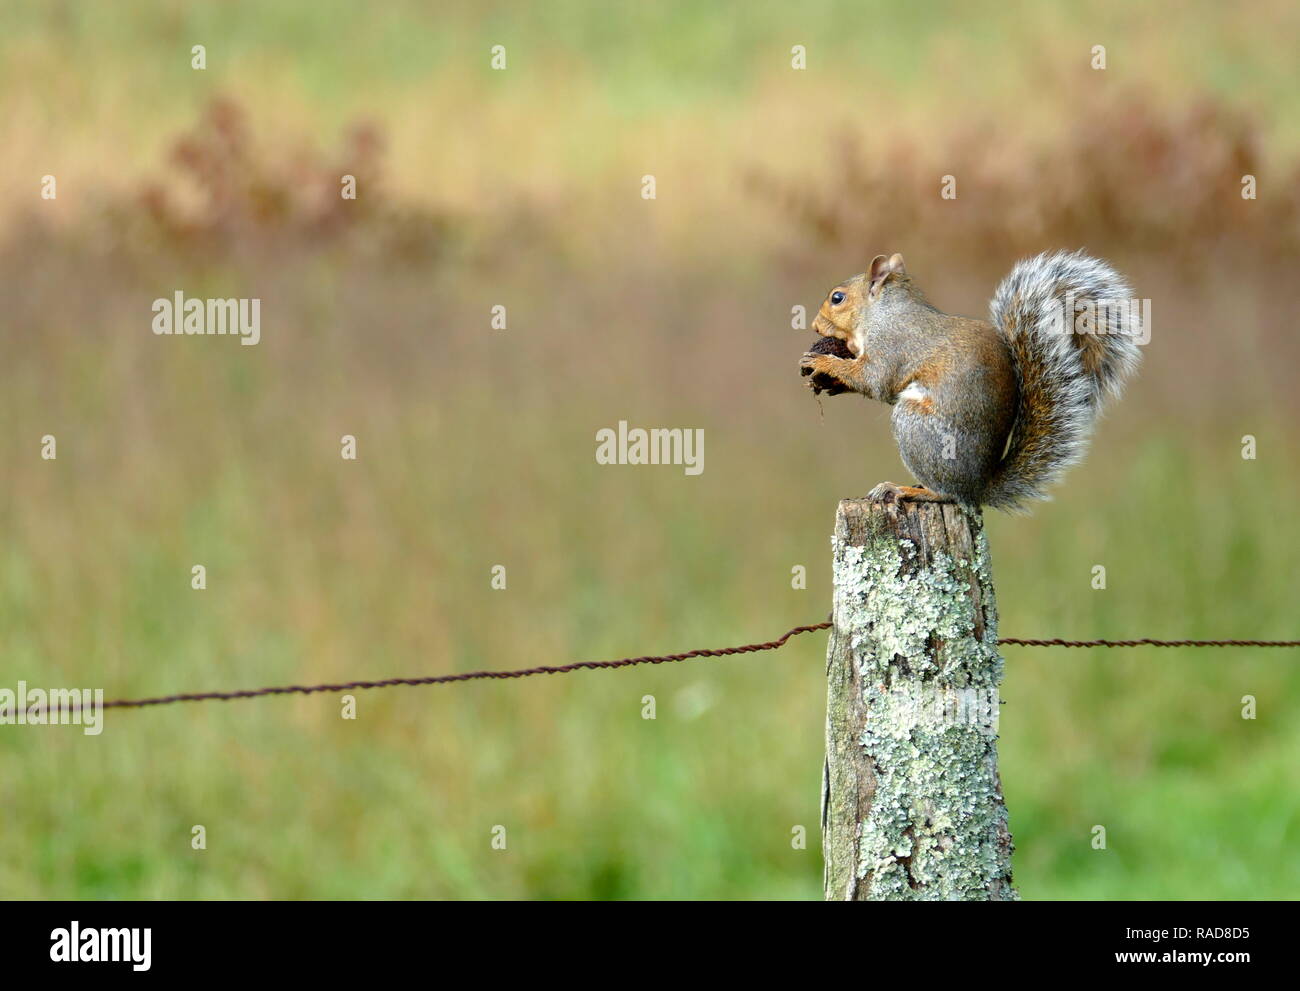 Squirrel eating a walnut on a fence Stock Photo